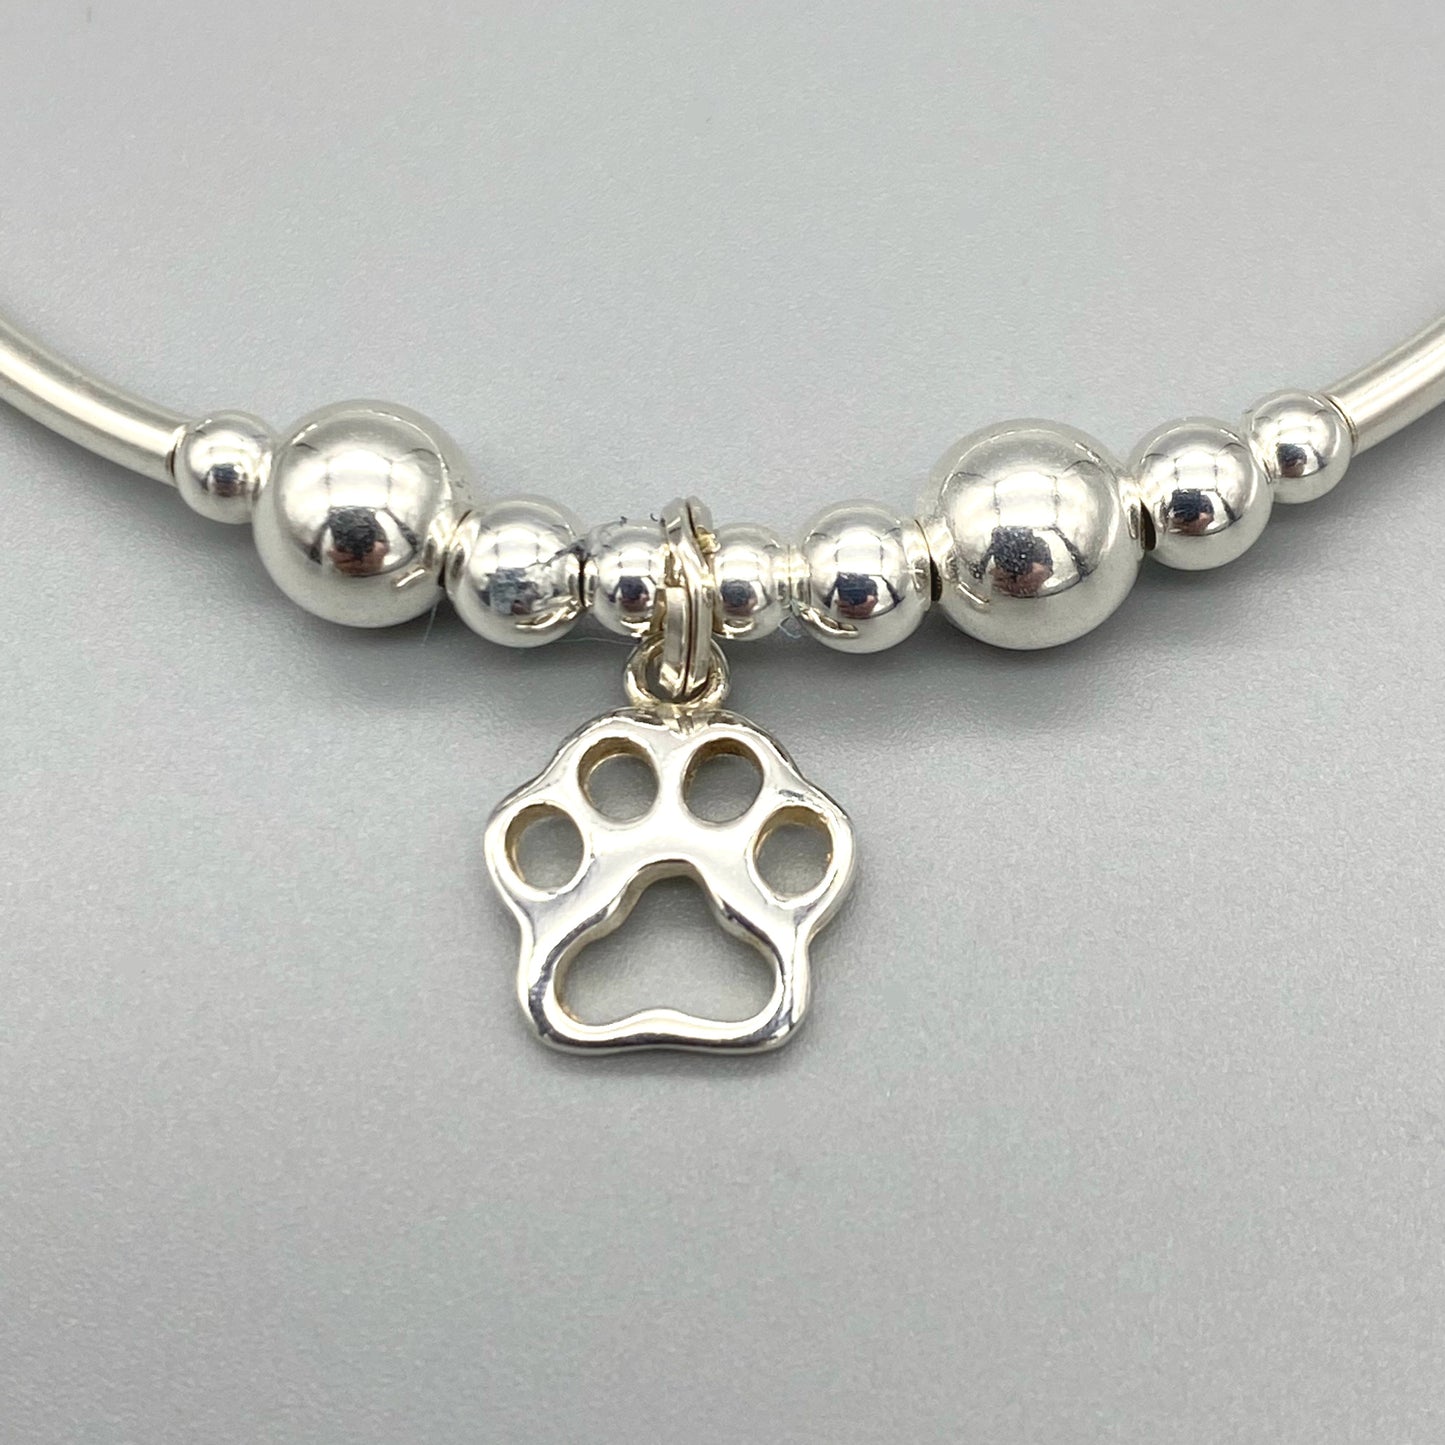 Closeup of Dog Paw Charm Sterling Silver Stacking Bracelet for her by My Silver Wish